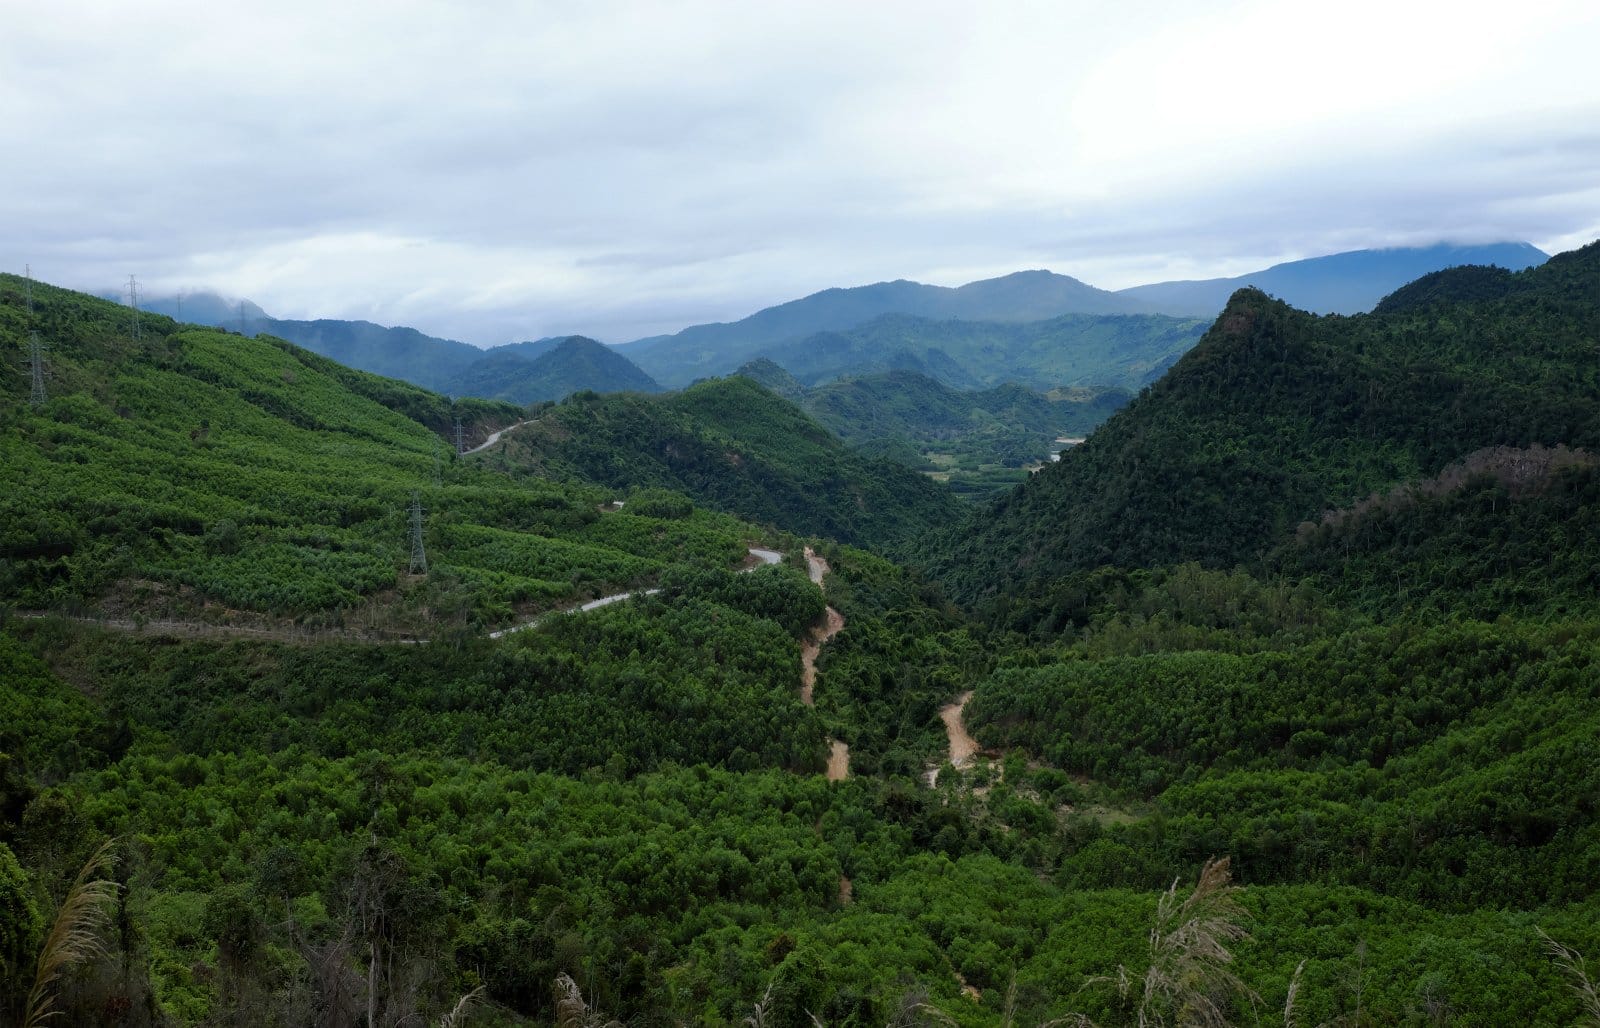 <p class="wp-caption-text">Image Credit: Shutterstock / xuanhuongho</p>  <p><span>The Ho Chi Minh Trail, once a strategic supply route for the North Vietnamese, has been transformed into a path of discovery and reconciliation. Veterans who navigated this labyrinth during the war now guide trekkers through the dense jungles and rugged terrain, offering insights into the ingenuity and resilience of the Vietnamese people. The trail spans a significant portion of Vietnam, with various entry points offering different difficulty levels and exploration. Along the way, hikers can expect to encounter hidden bunkers, unspoiled natural landscapes, and remnants of the past that tell the story of Vietnam’s struggle for independence.</span></p>